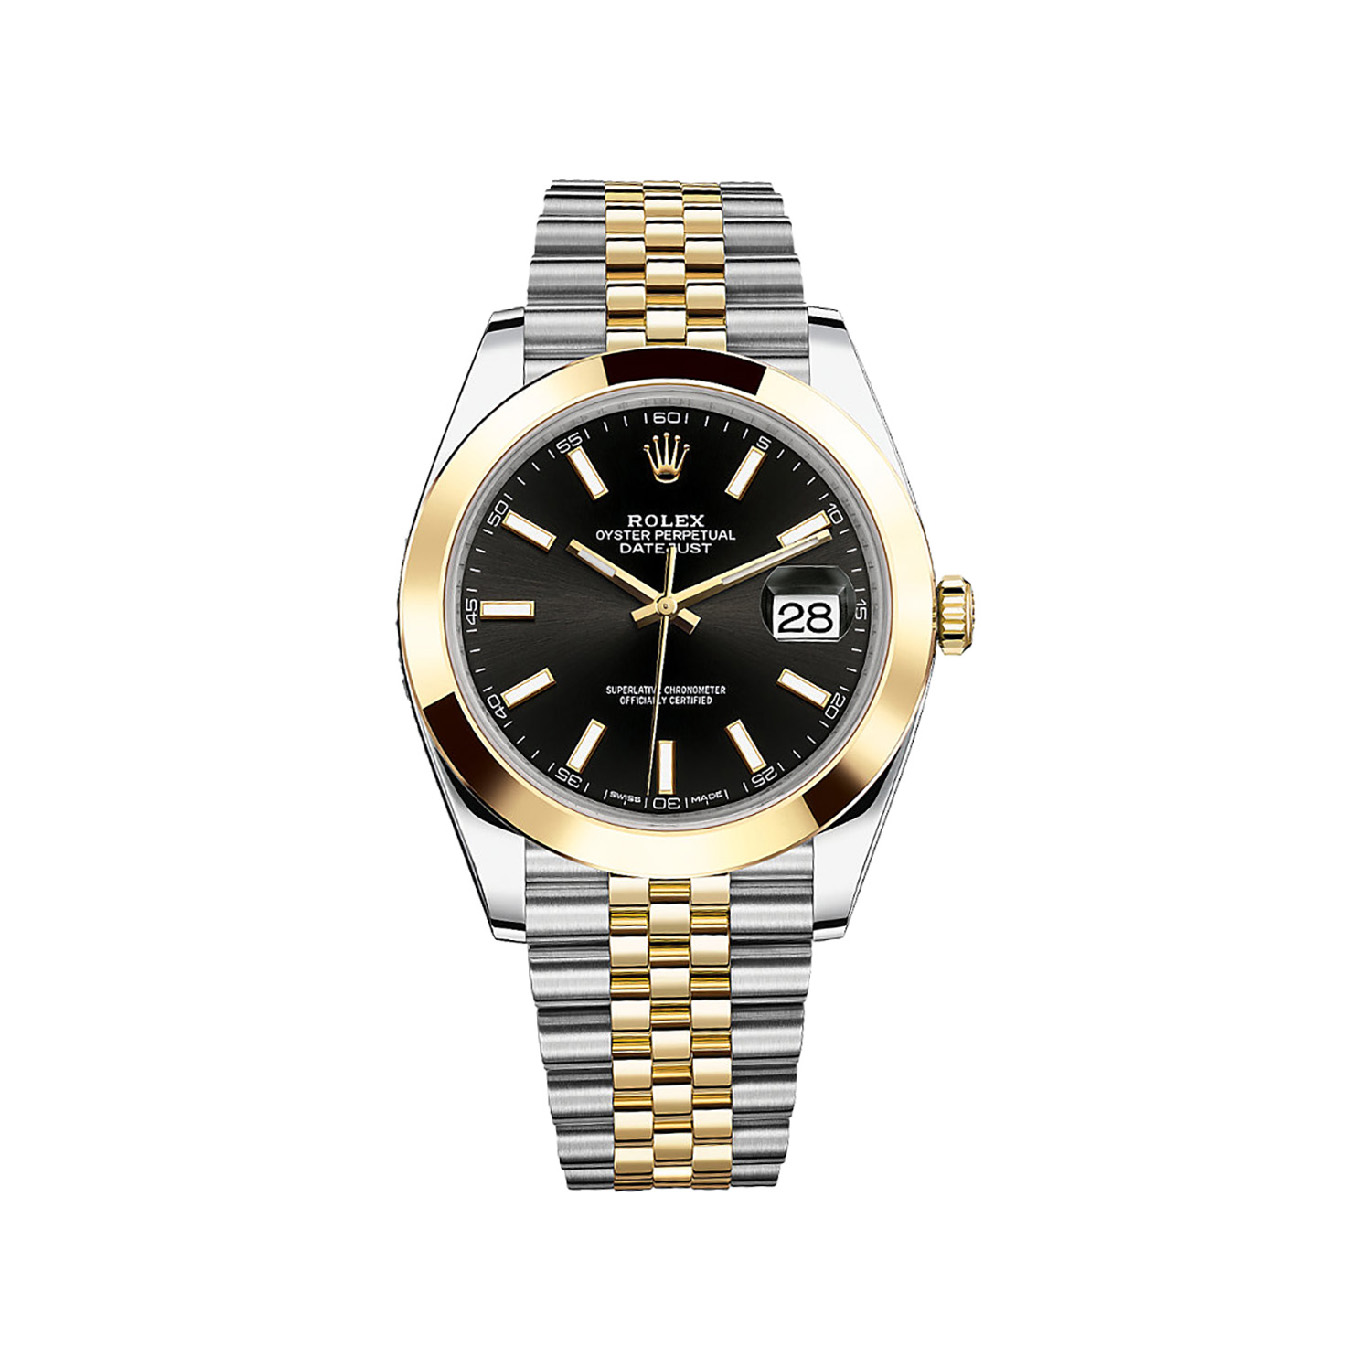 Datejust 41 126303 Gold & Stainless Steel Watch (Black)